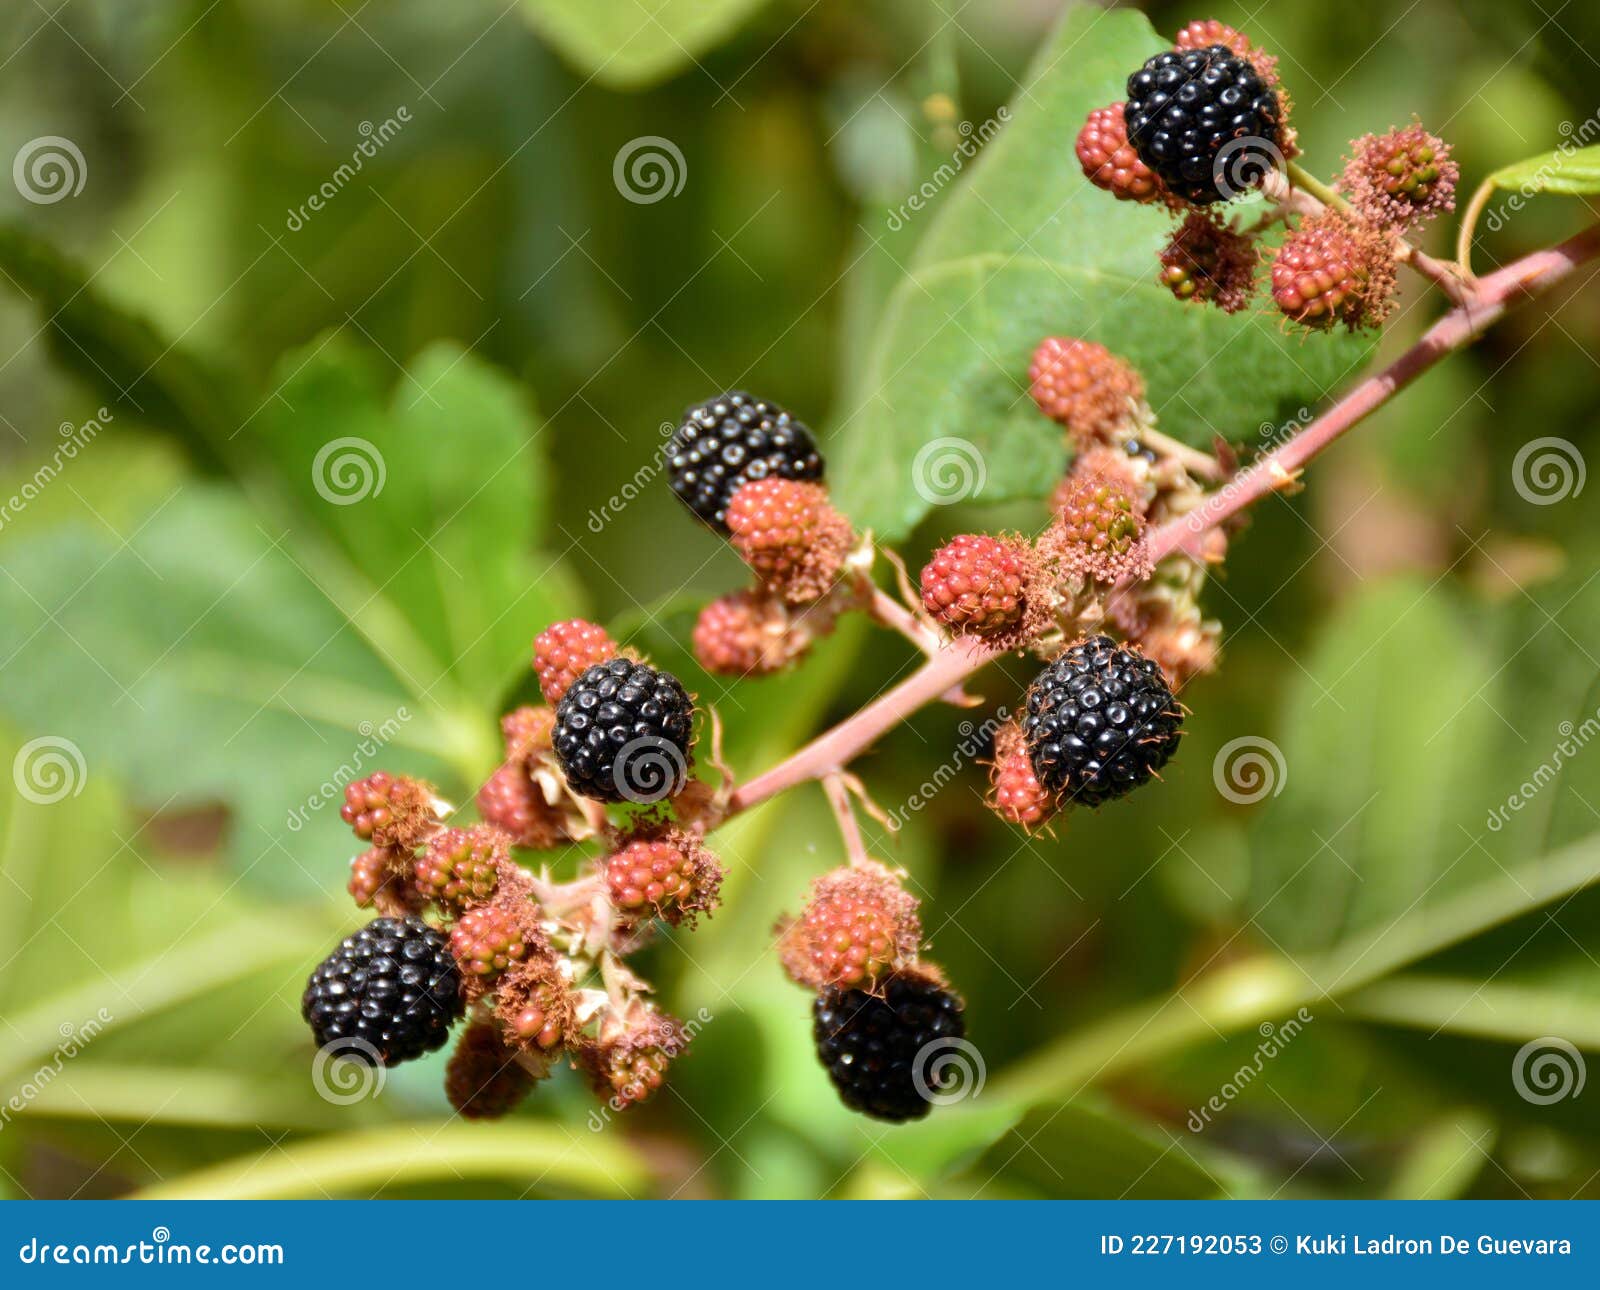 black and red berries of the blackberry